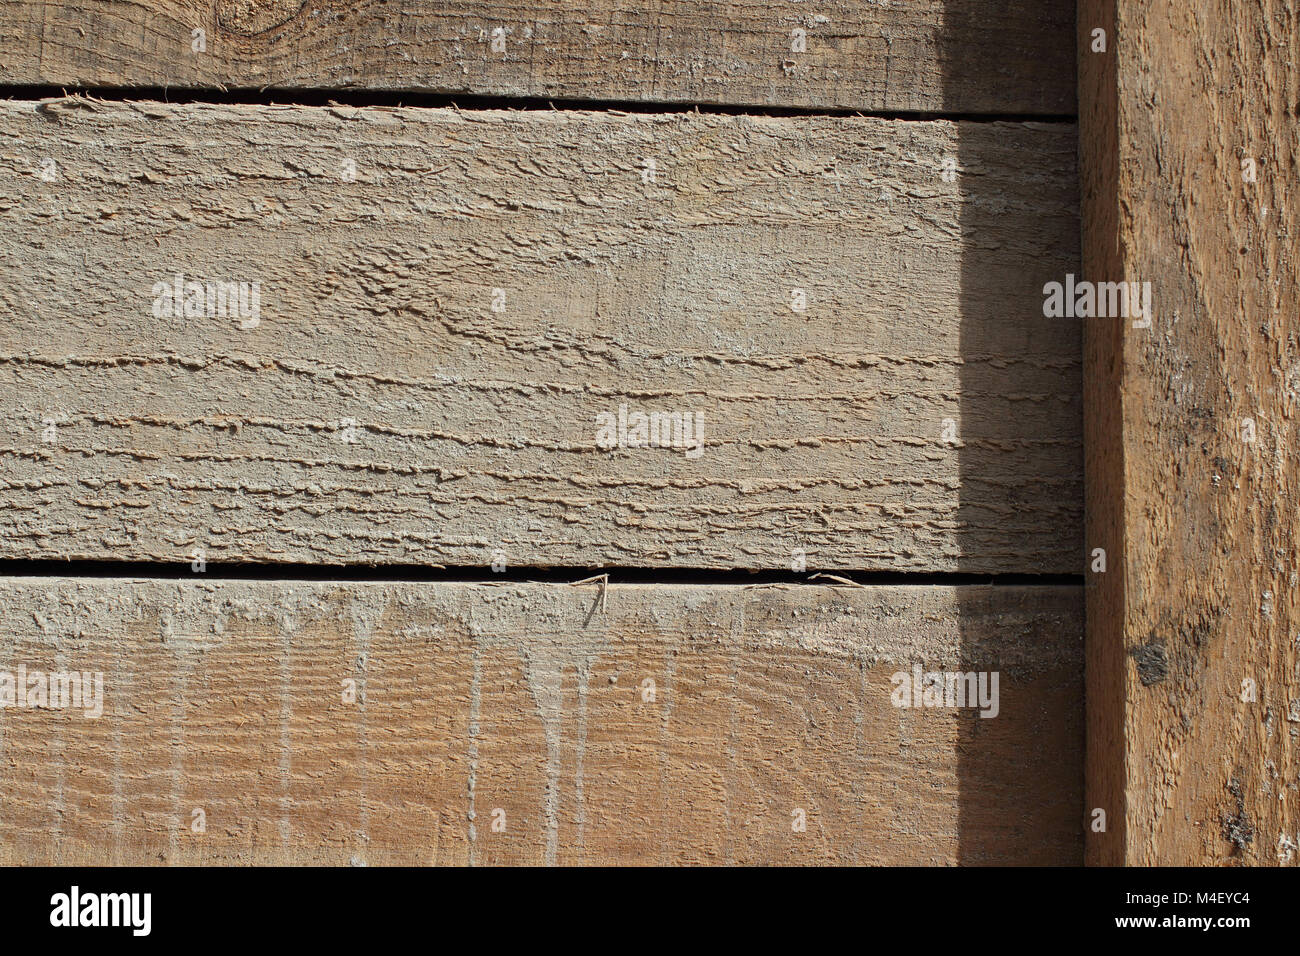 Pine boards wood texture Stock Photo